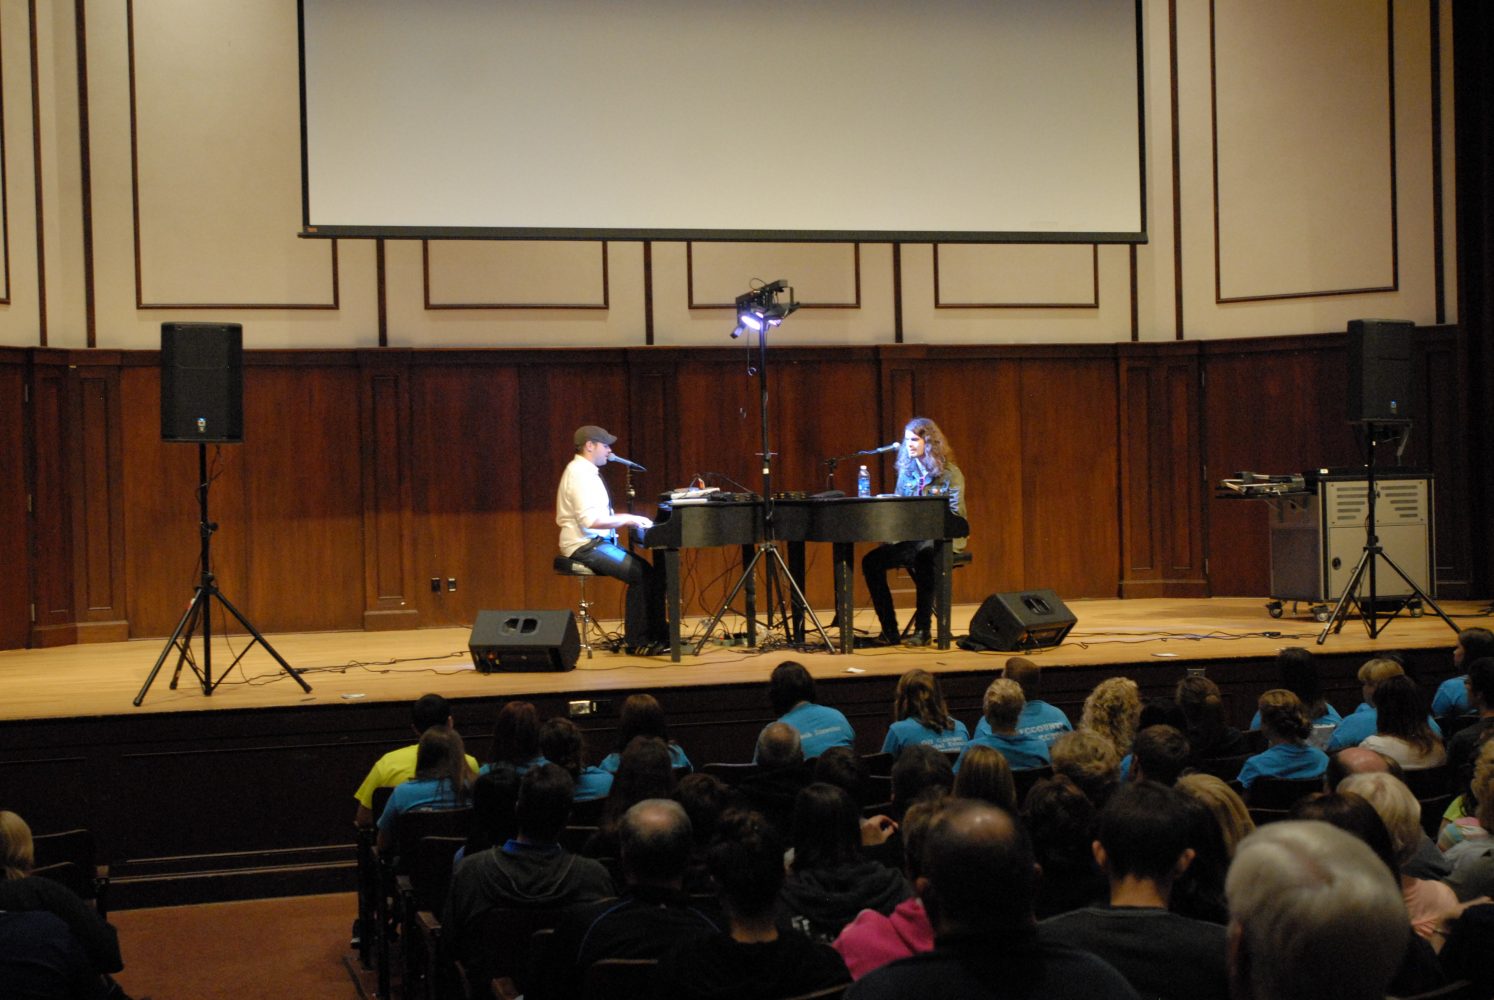 Midwest Dueling Pianos perform for students and parents in the Harriet Johnson Auditorium.
MARCIA RATLIFF